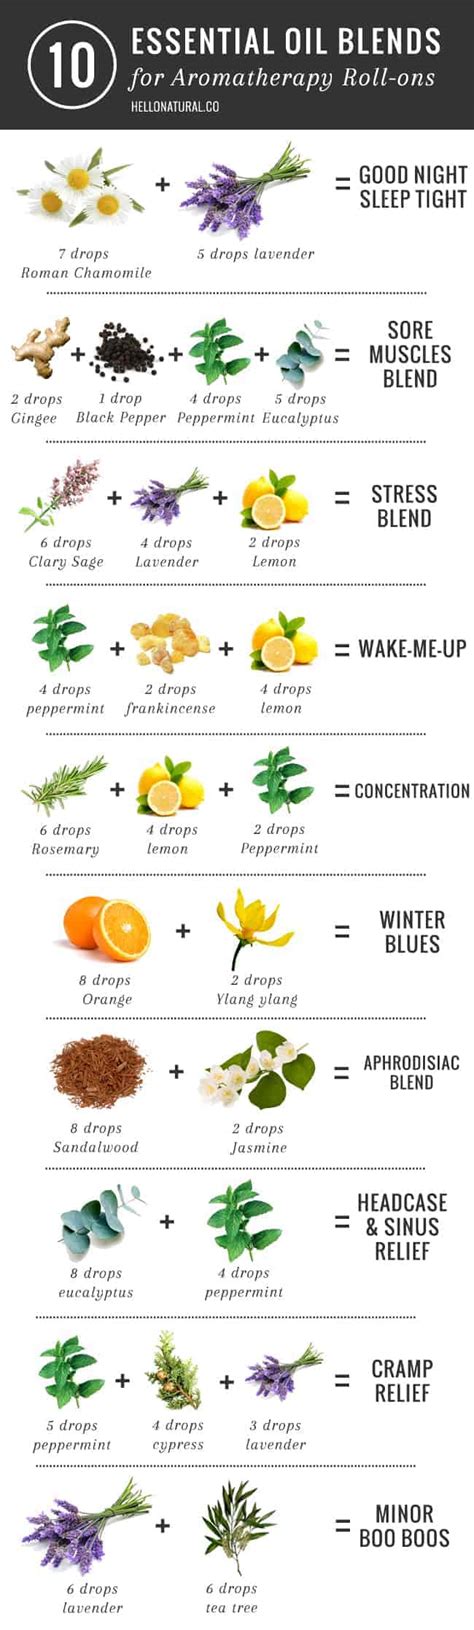 How many essential oils can you blend together?